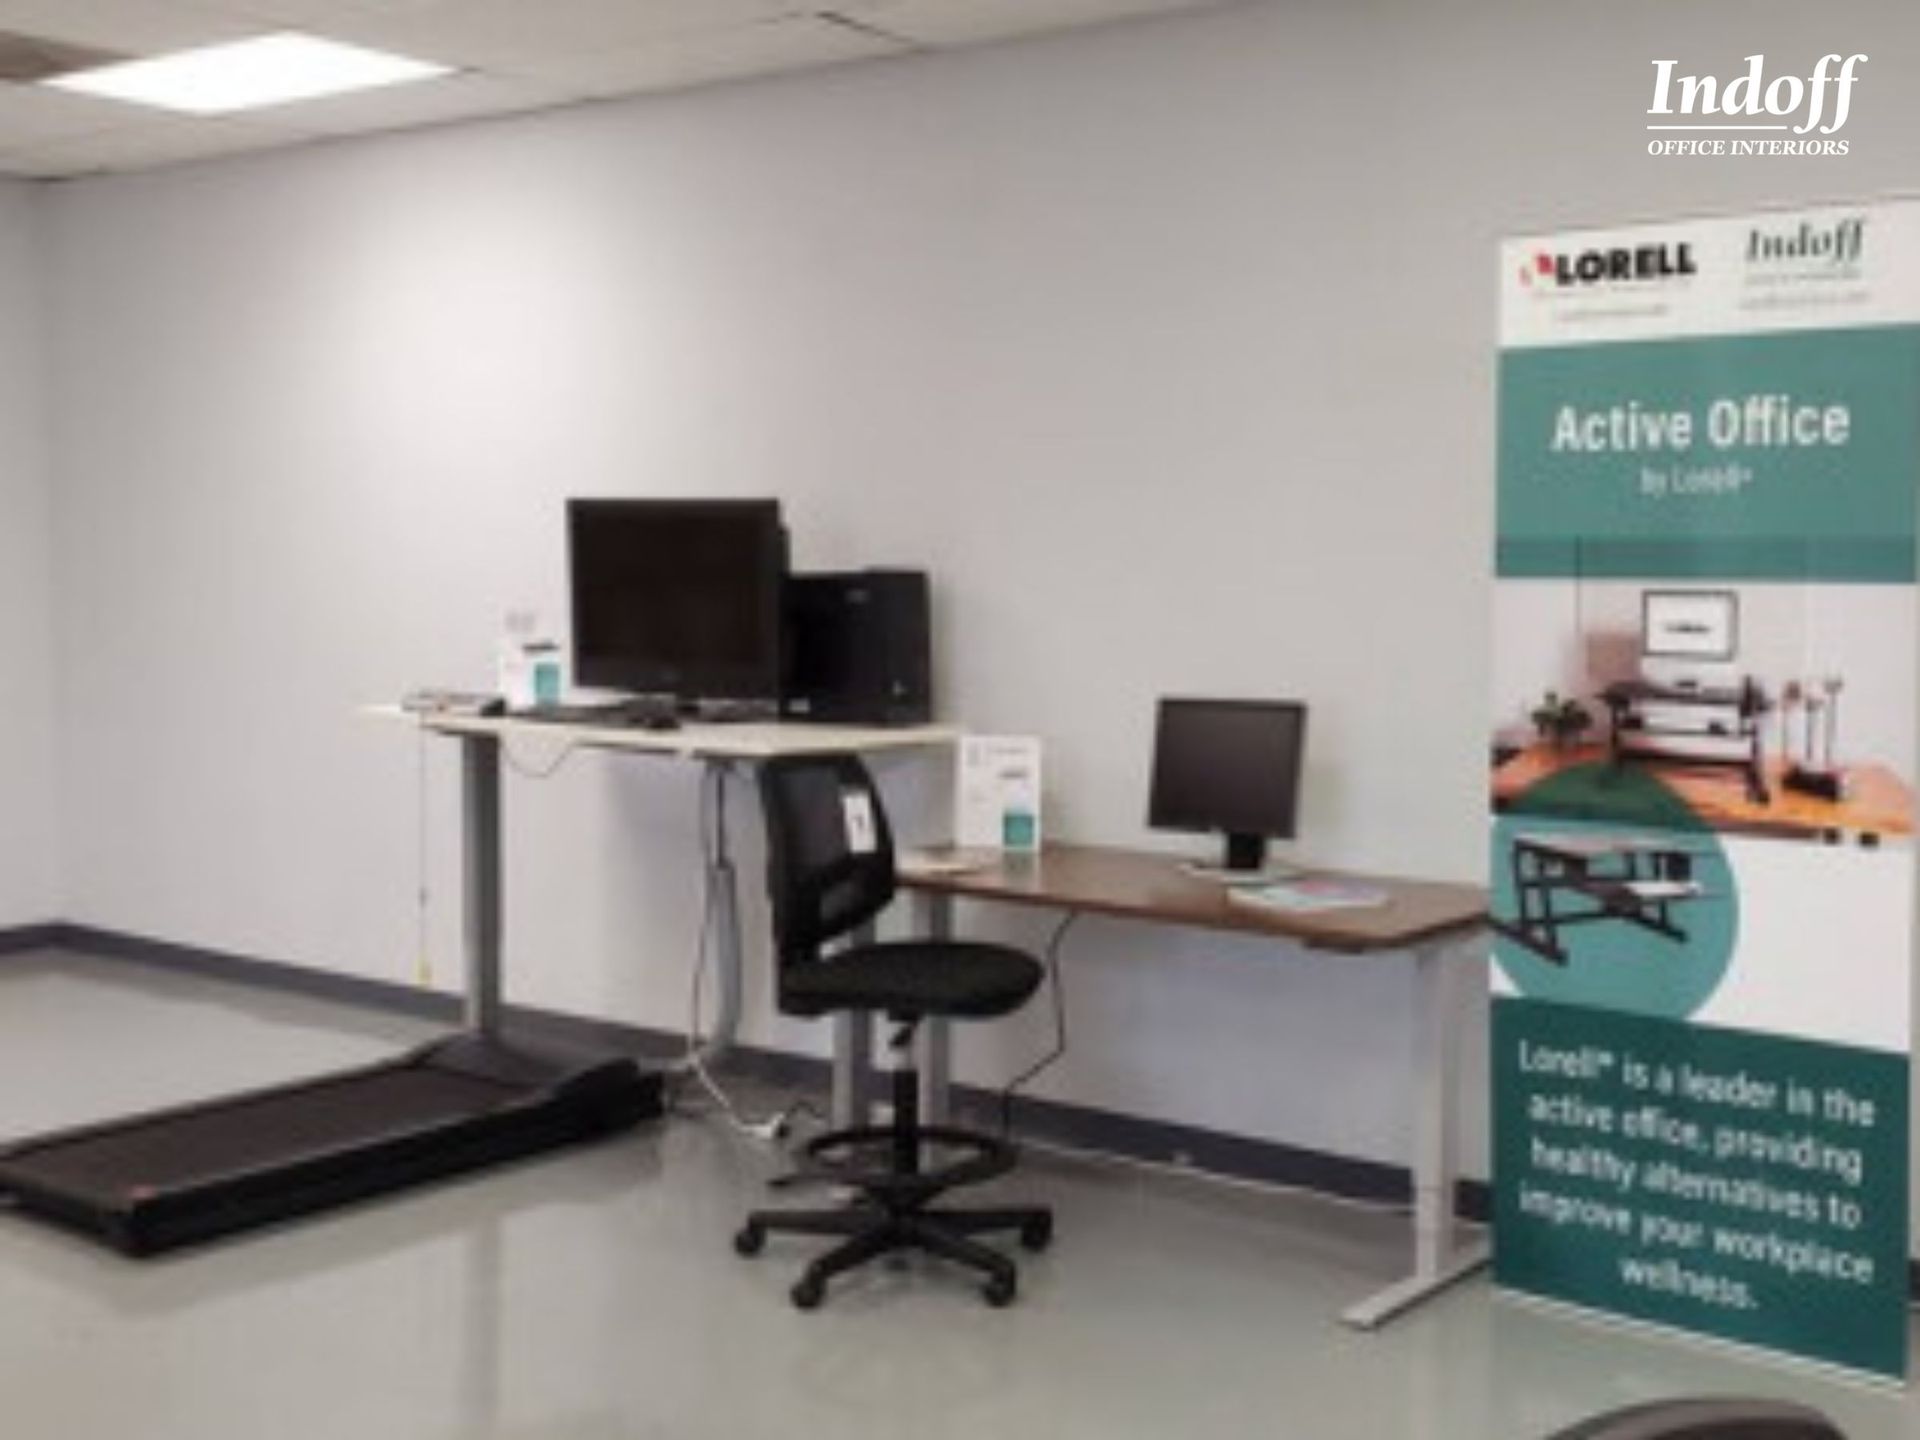 Test our height adjustable desk in the active office section.